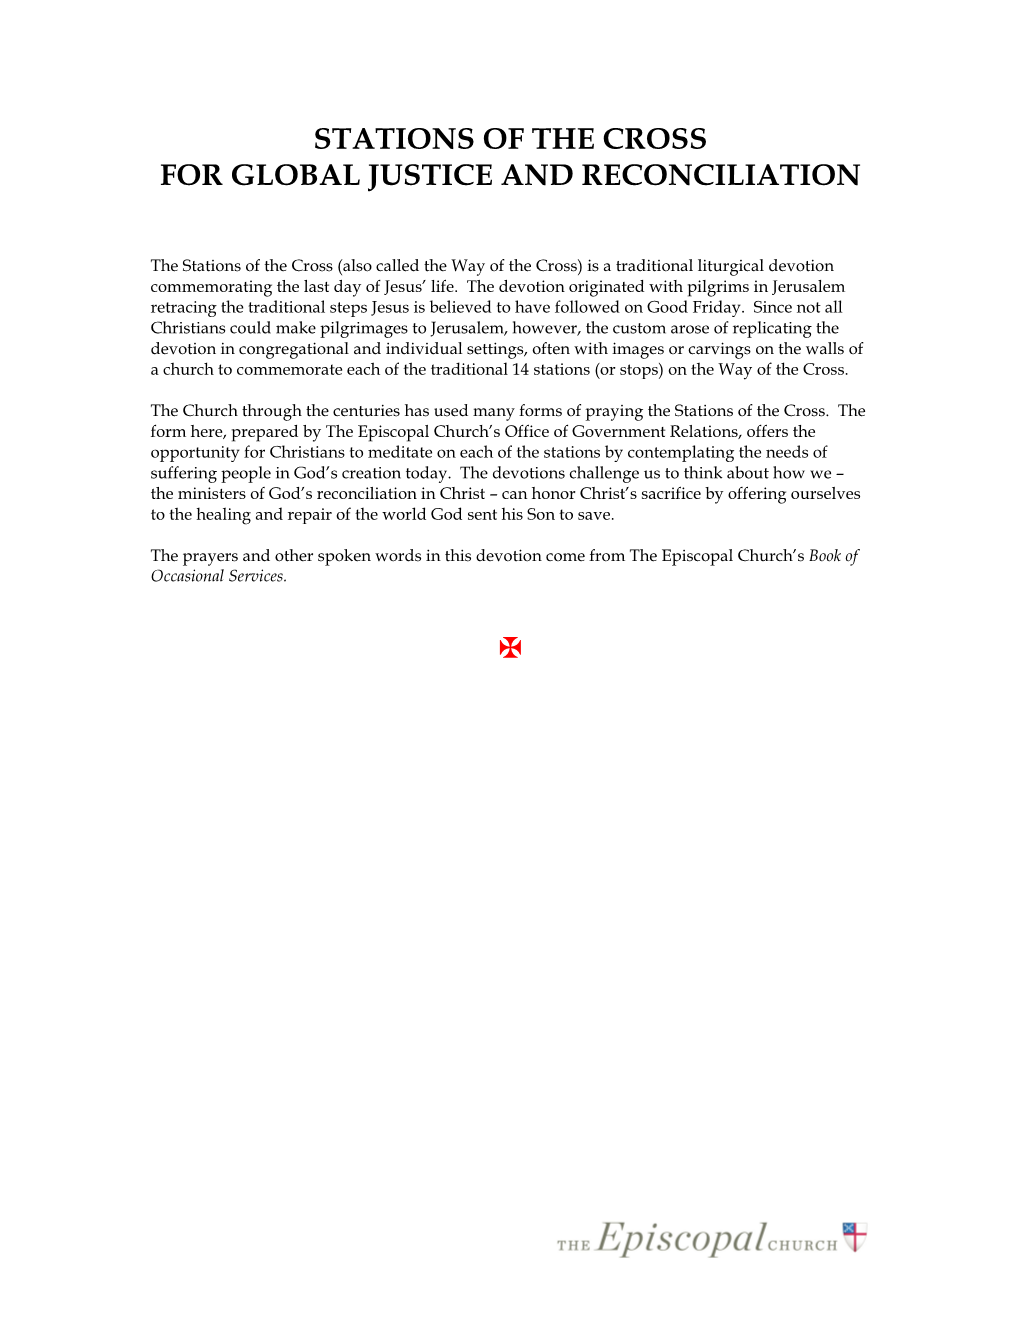 Stations of the Cross for Global Justice and Reconciliation